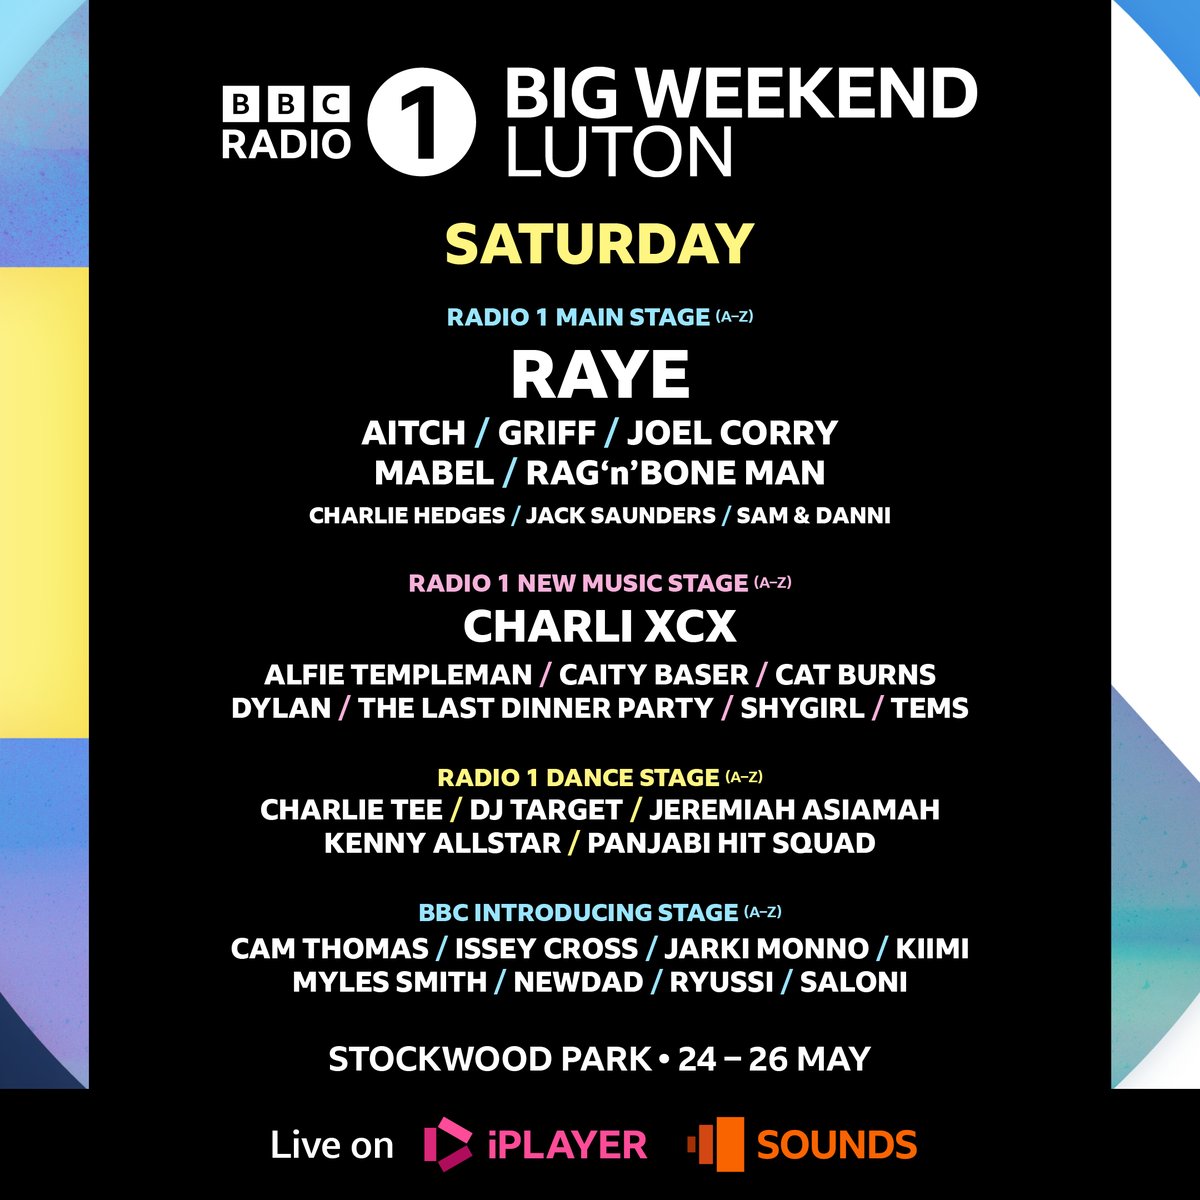 Saturday at #BigWeekend Luton is gonna be veRAYE special ♥️ For more details and info on tickets, visit bbc.co.uk/bigweekend